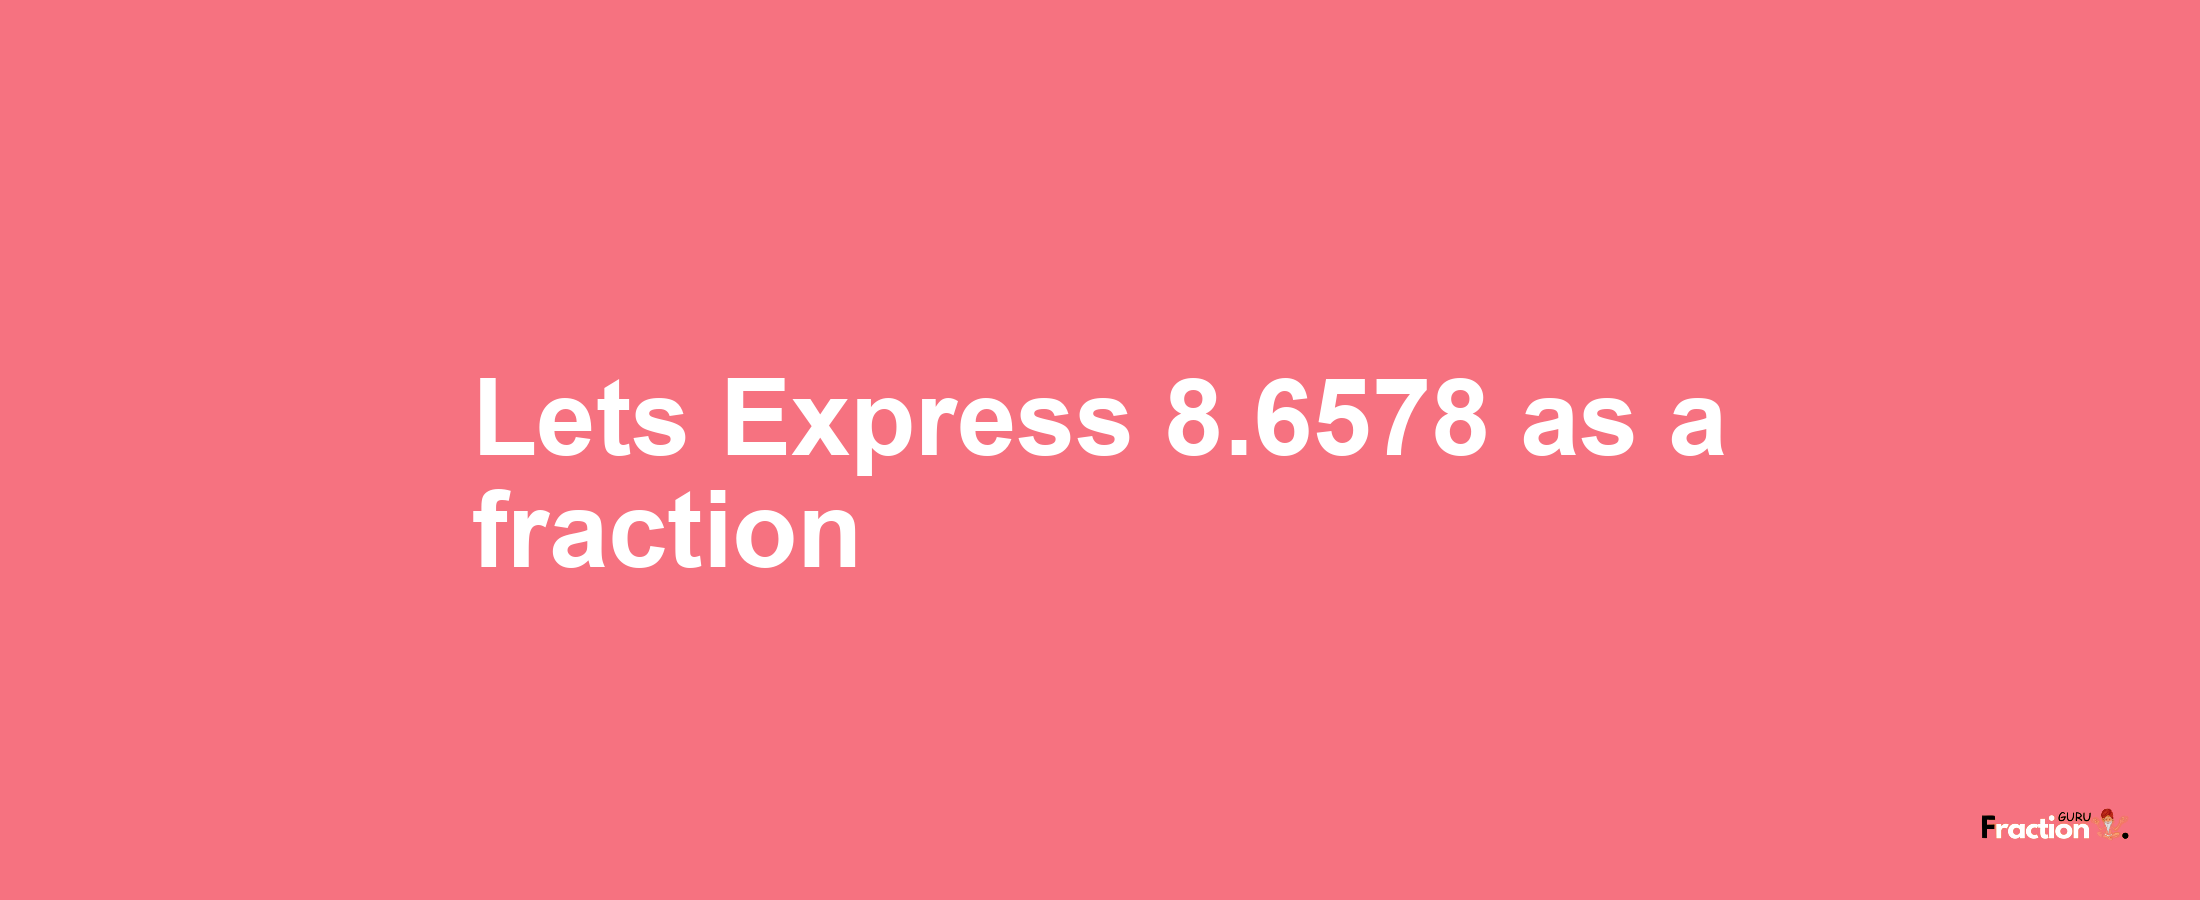 Lets Express 8.6578 as afraction